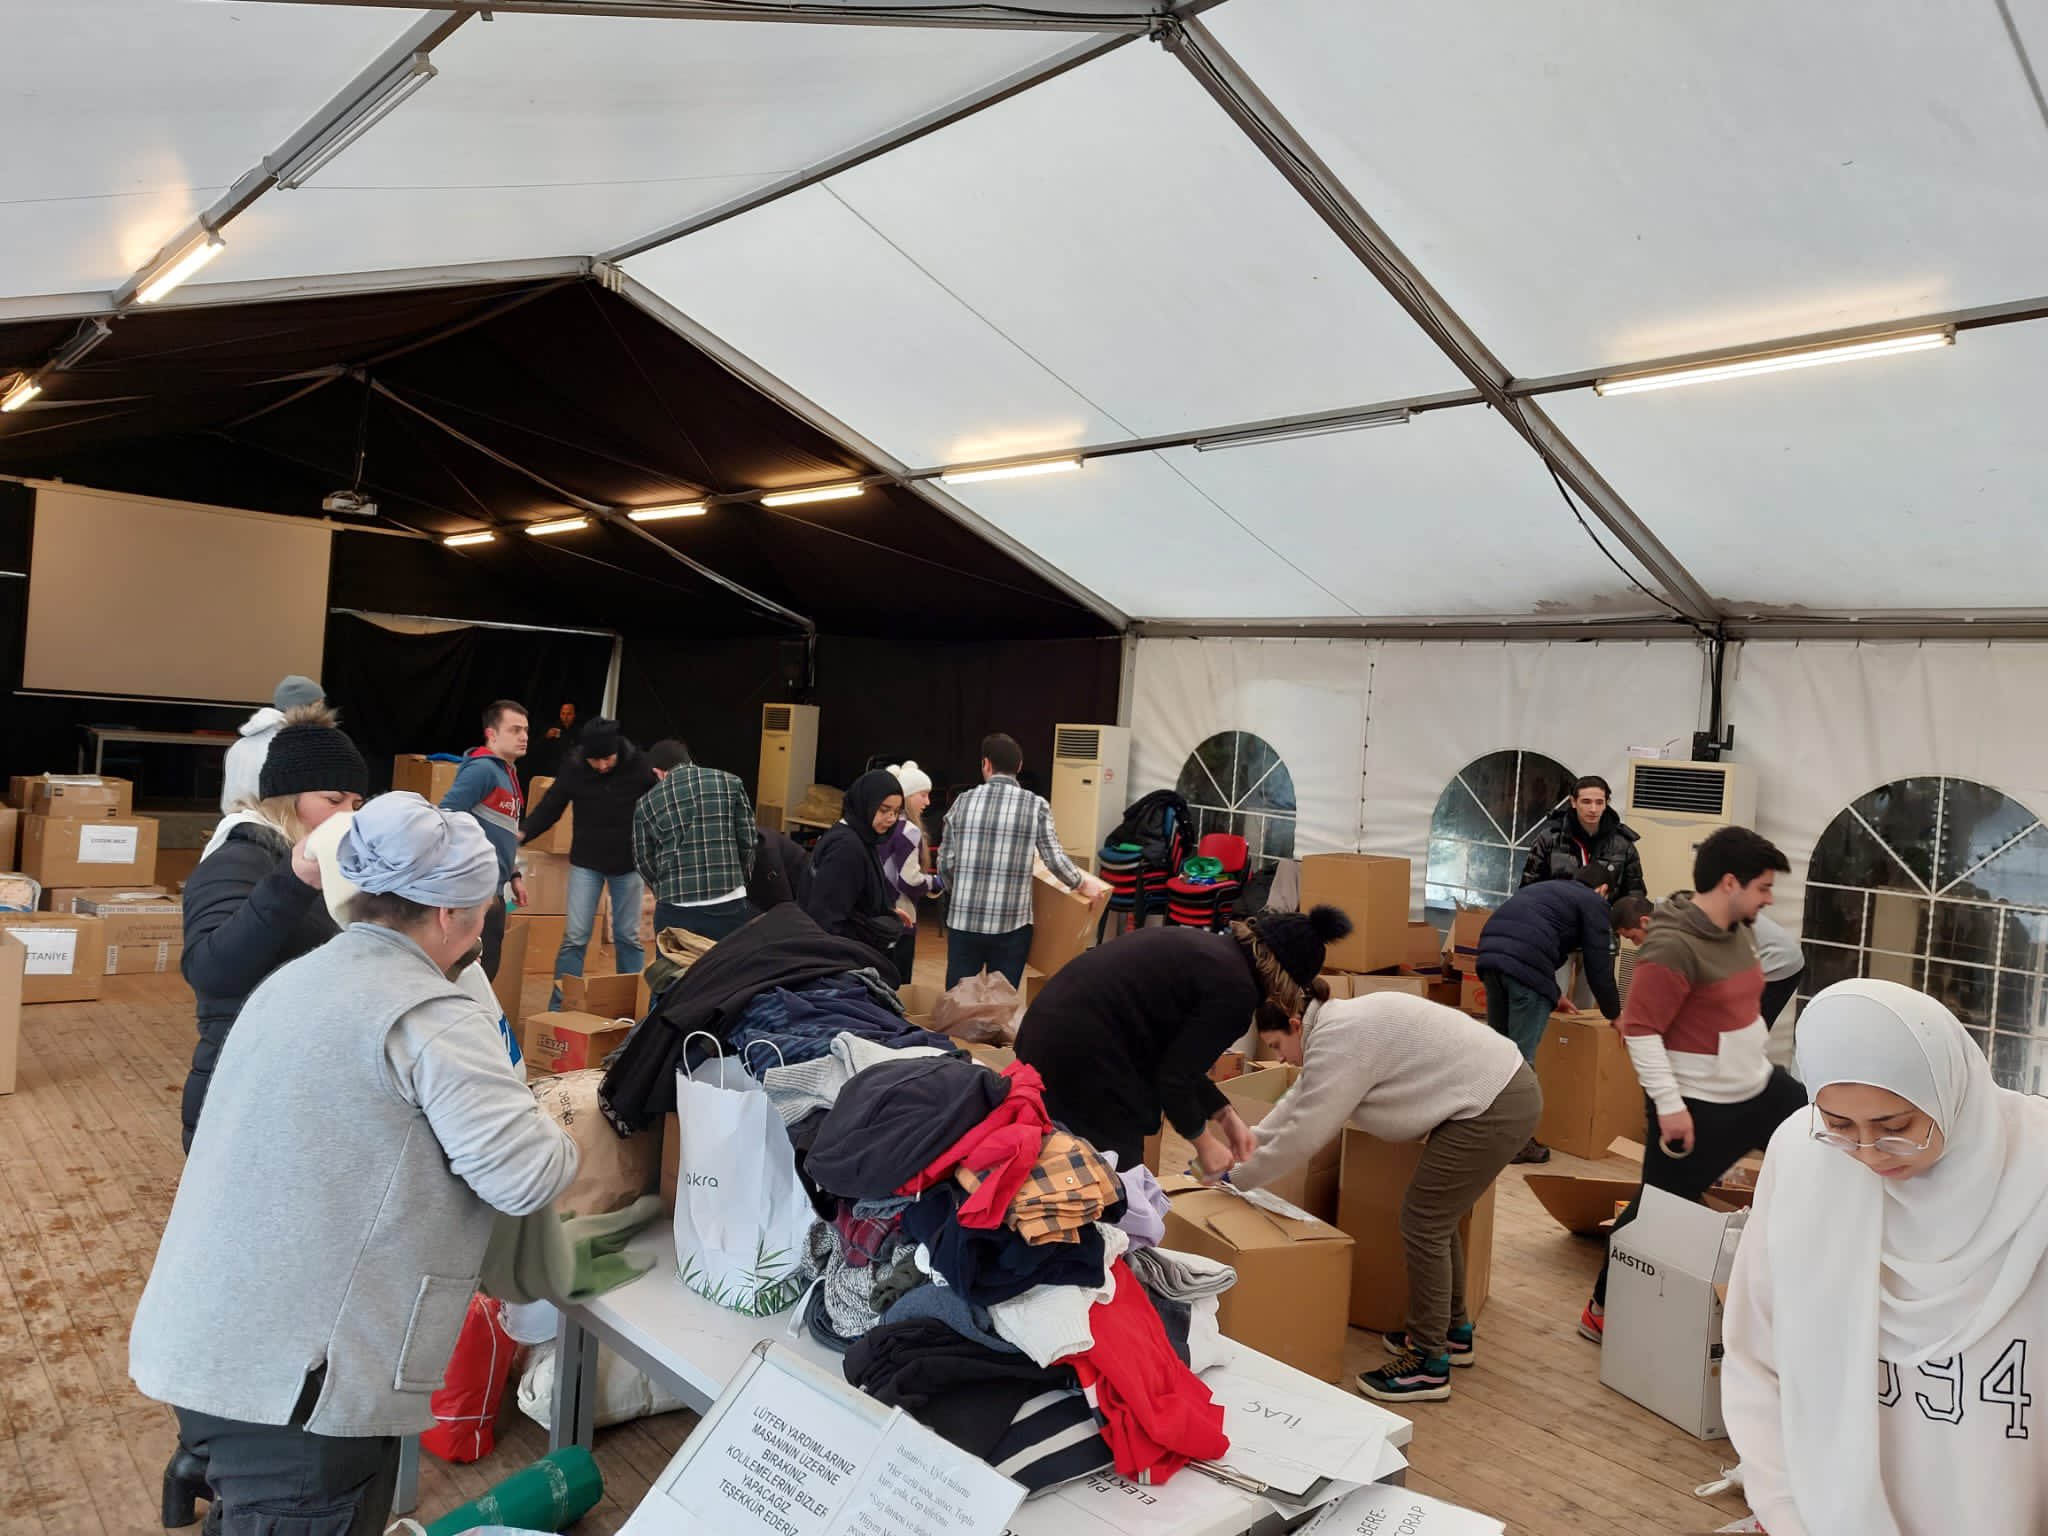 Aid being sorted in a Turkish university to be sent to the earthquake zone